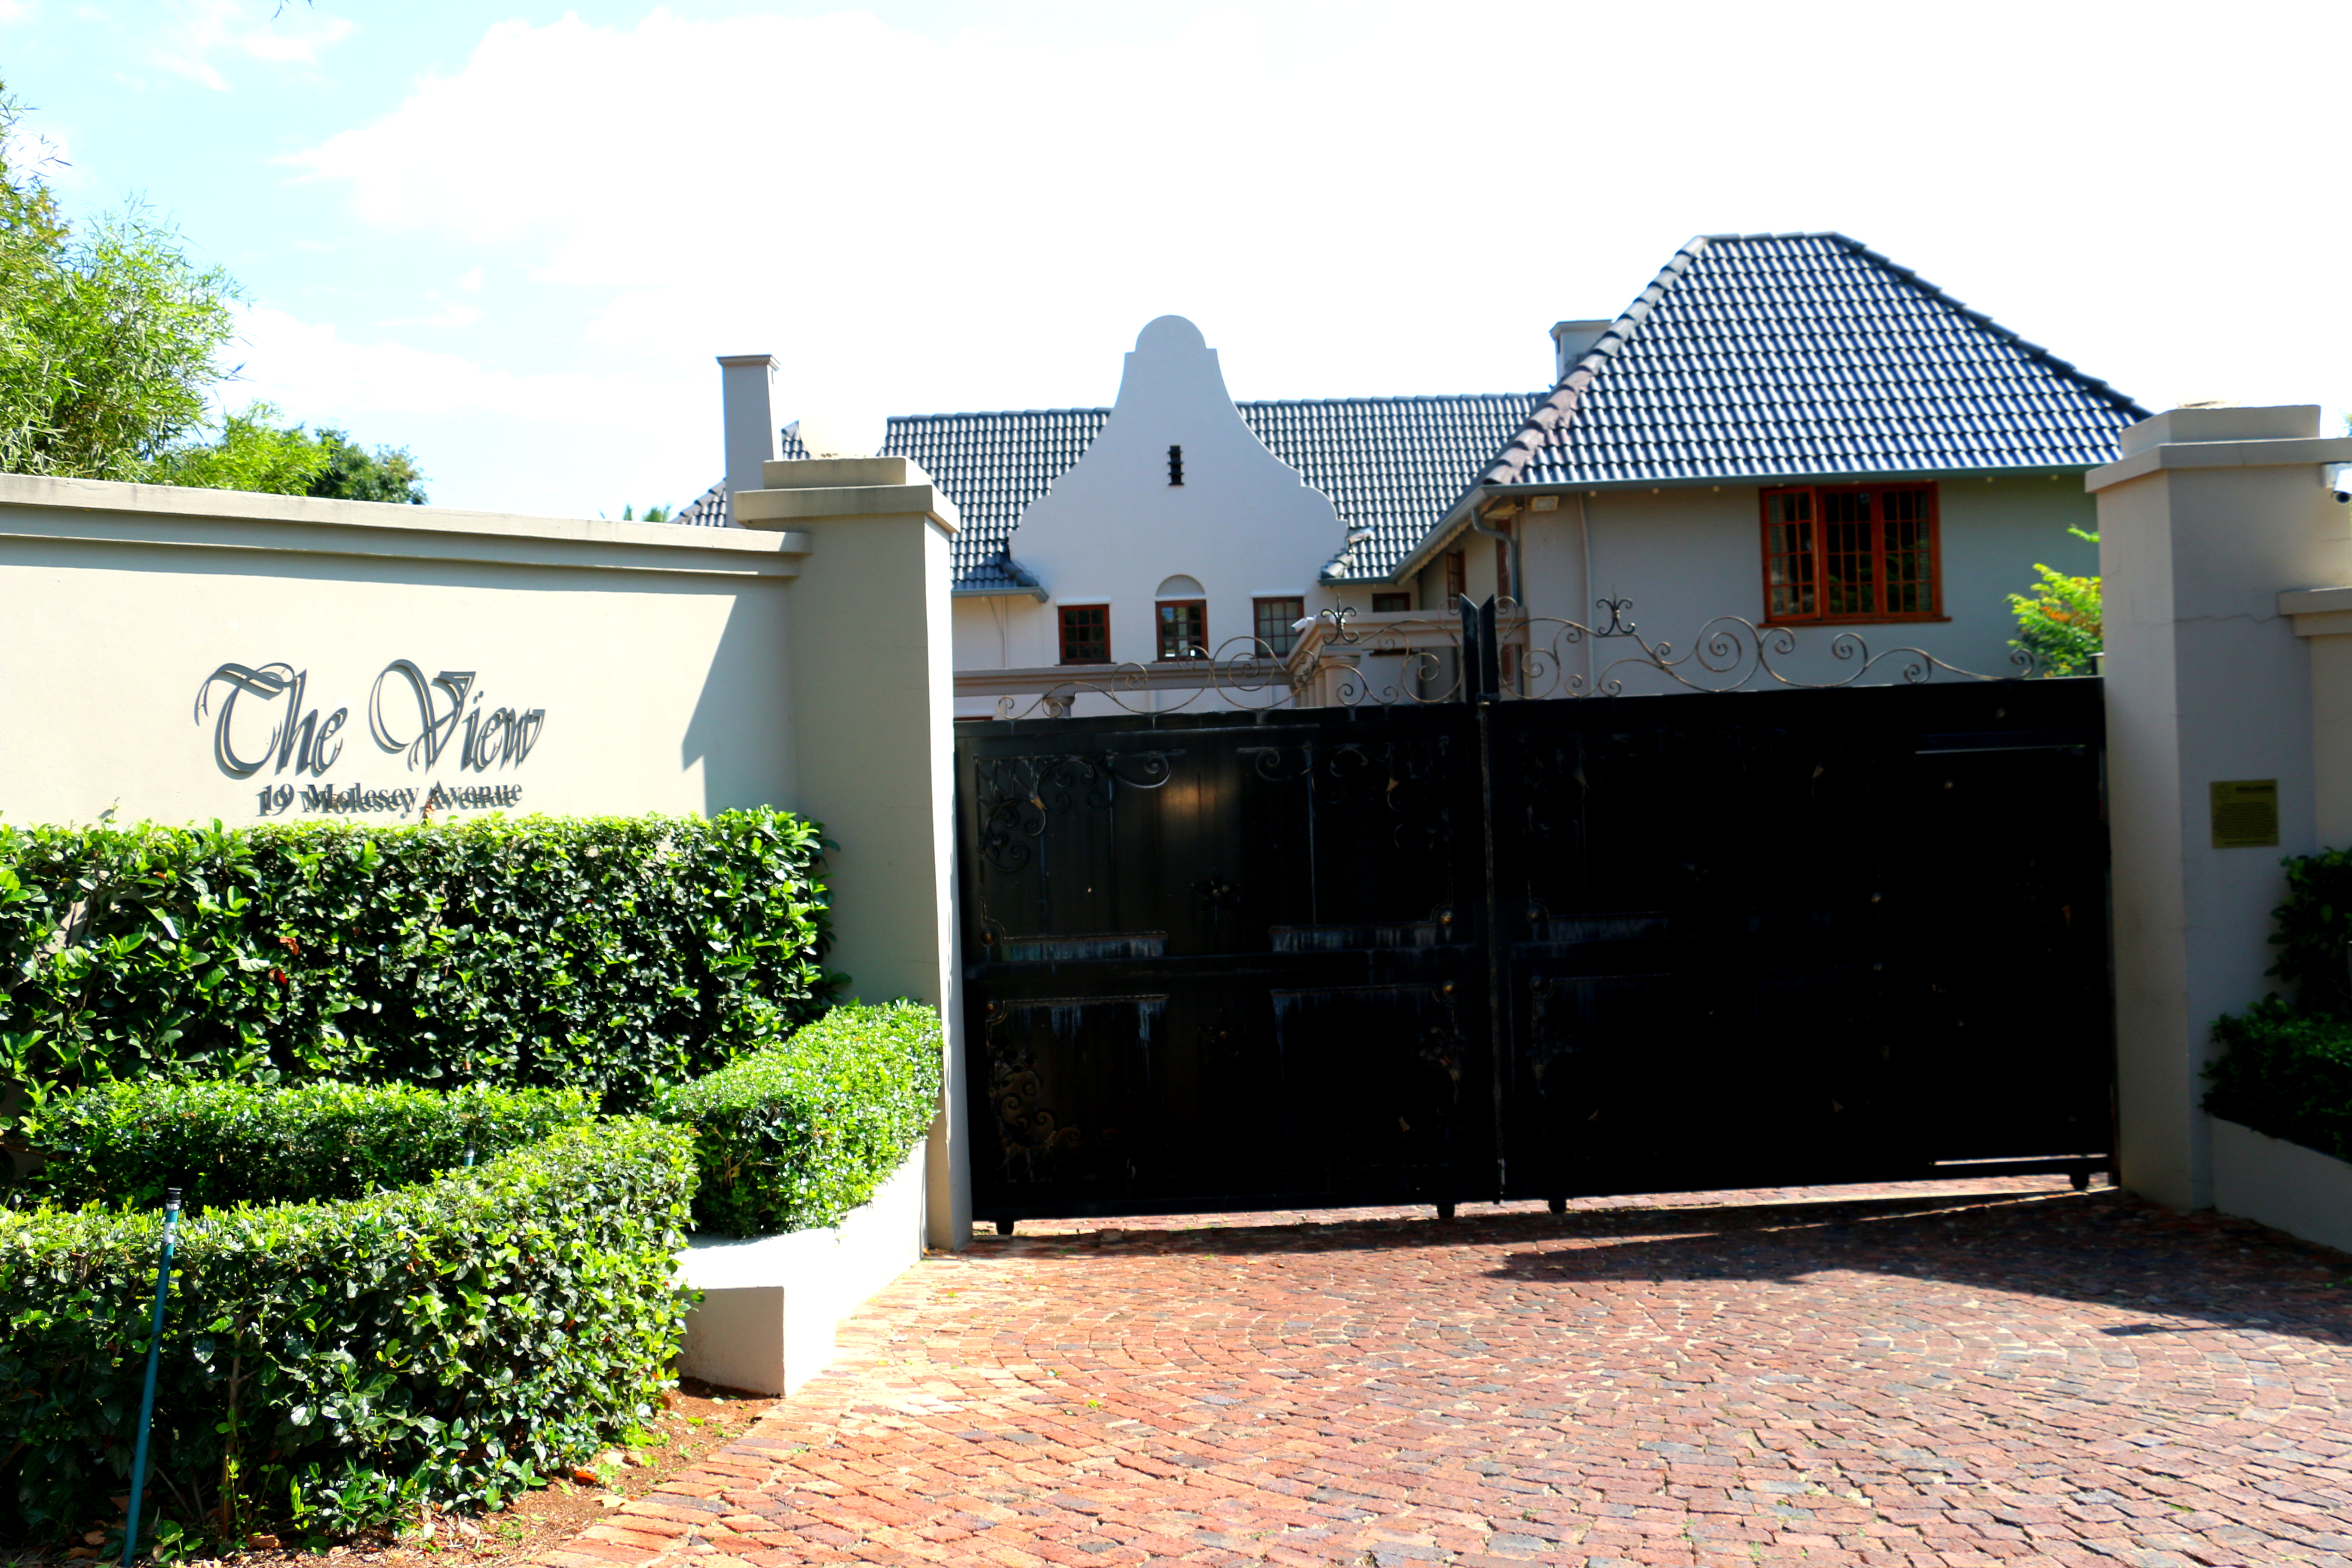 Best Place To Stay In Johannesburg South Africa Dating With Passports